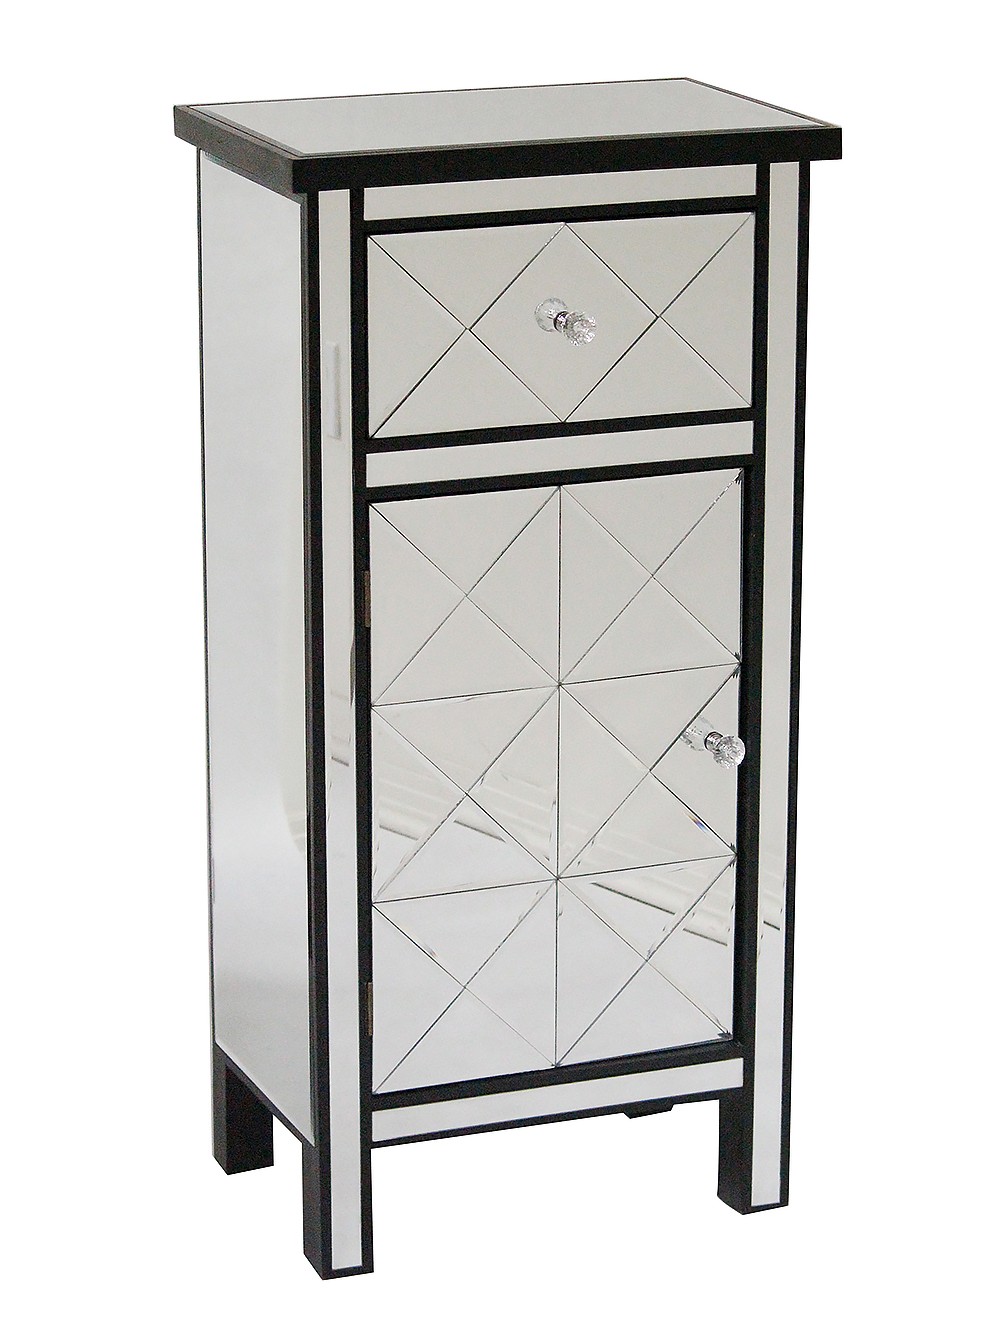 20" X 13" X 39.76" Black MDF Wood Mirrored Glass Tall Accent Cabinet with Beveled Mirror Drawer and Door